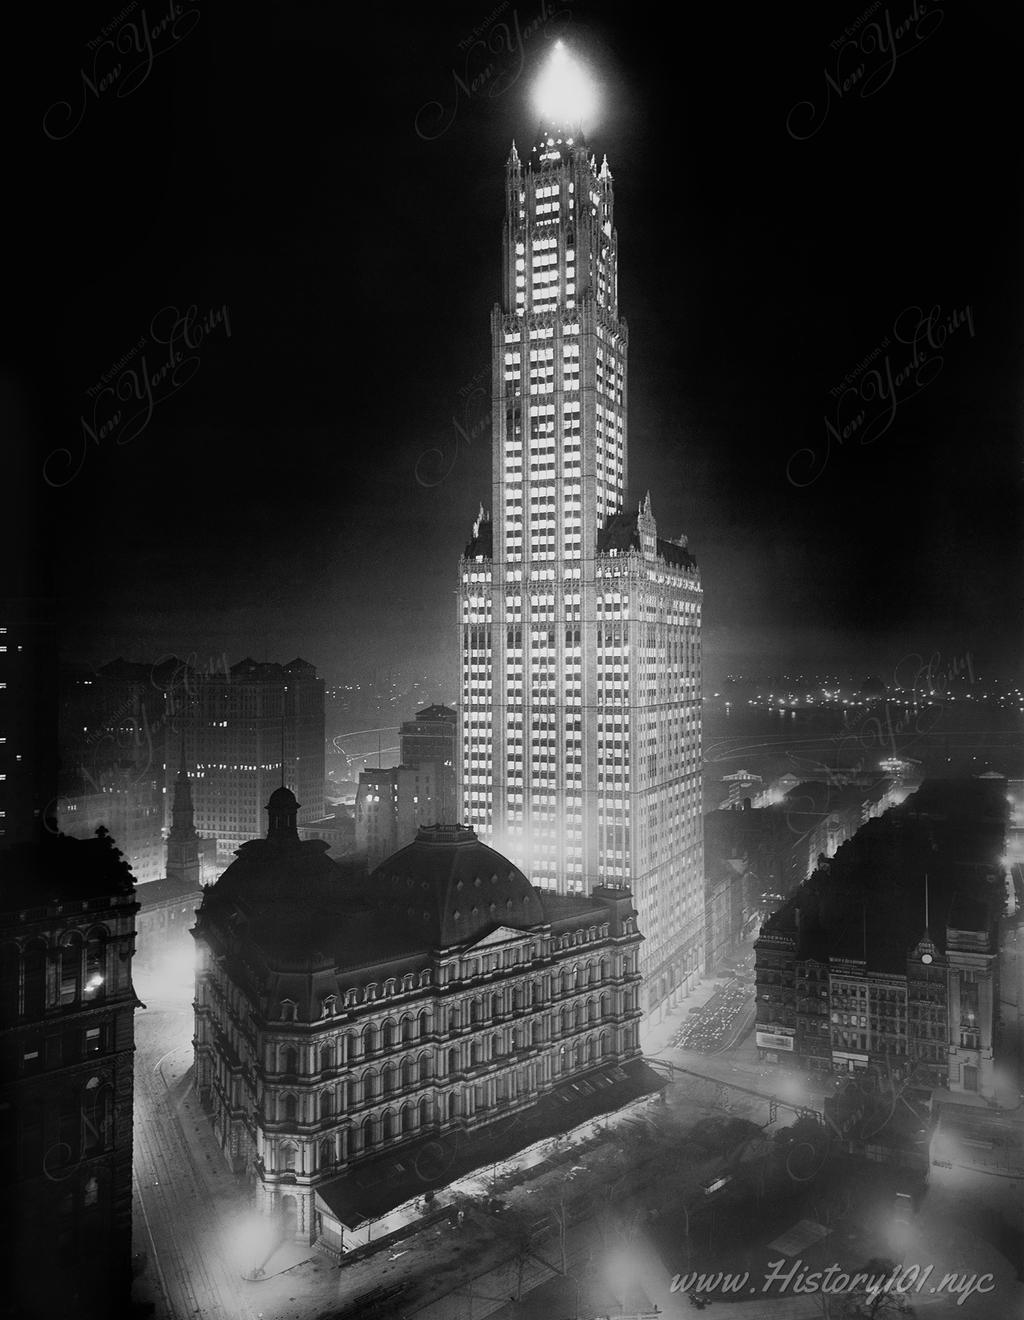 Photograph of the Woolworth Building and surrounding streets bathed in the artificial light of the city that never sleeps.